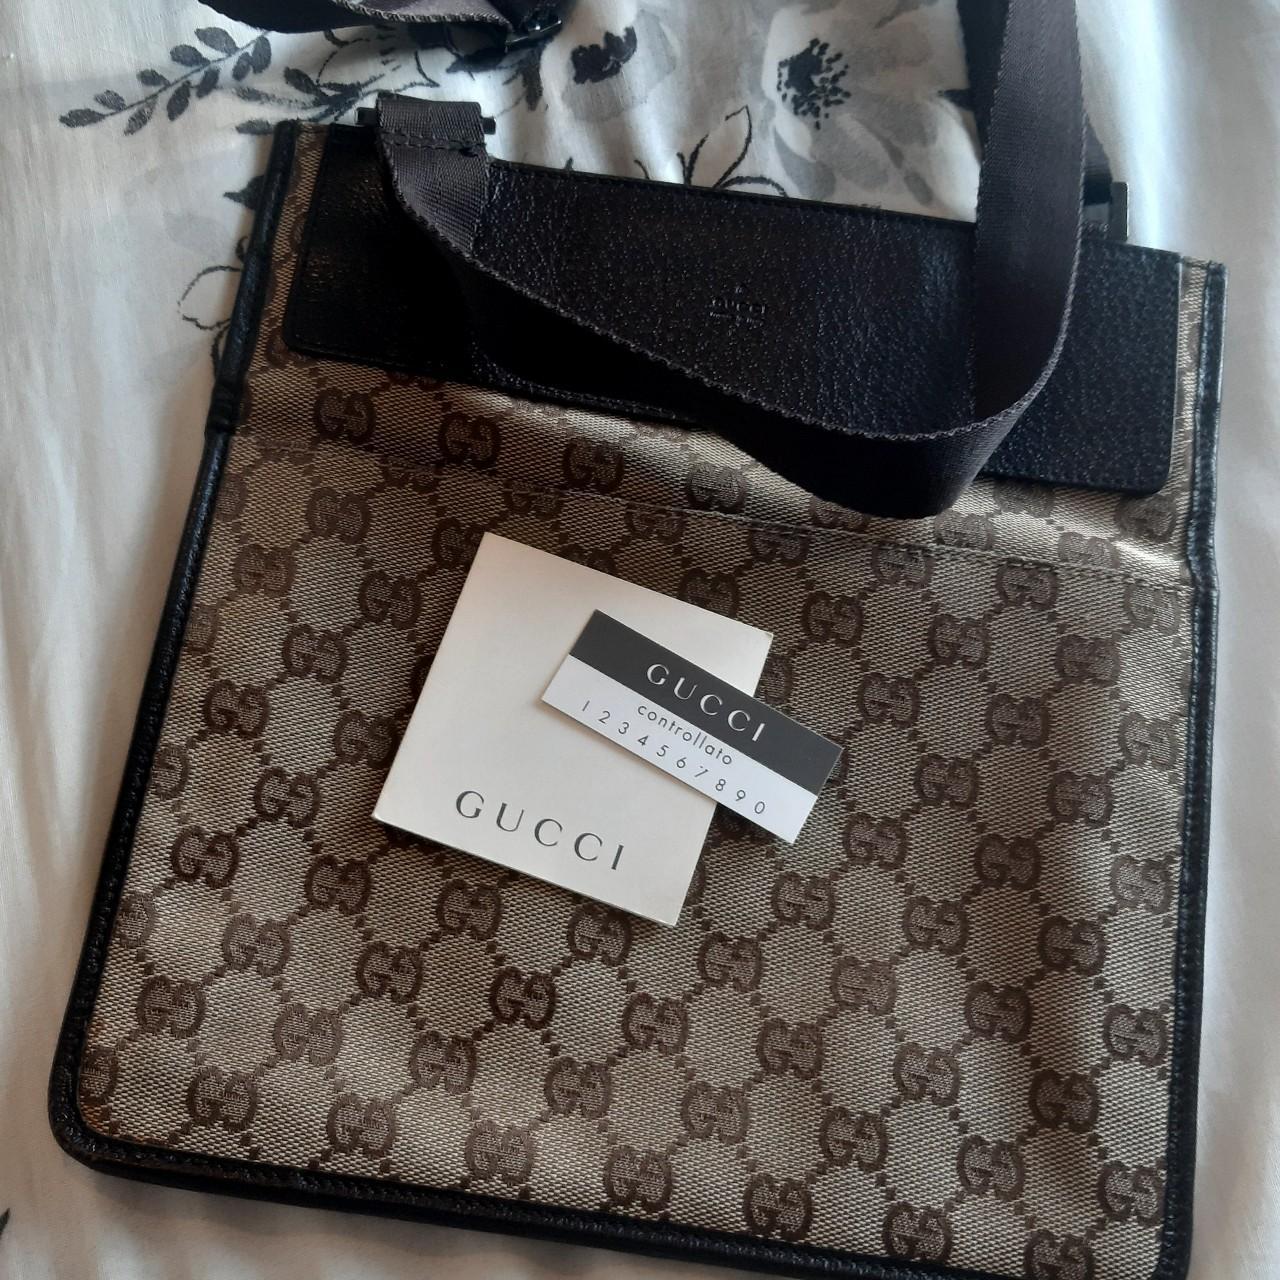 Authentic Gucci Vintage Leather Purse! - Has been - Depop